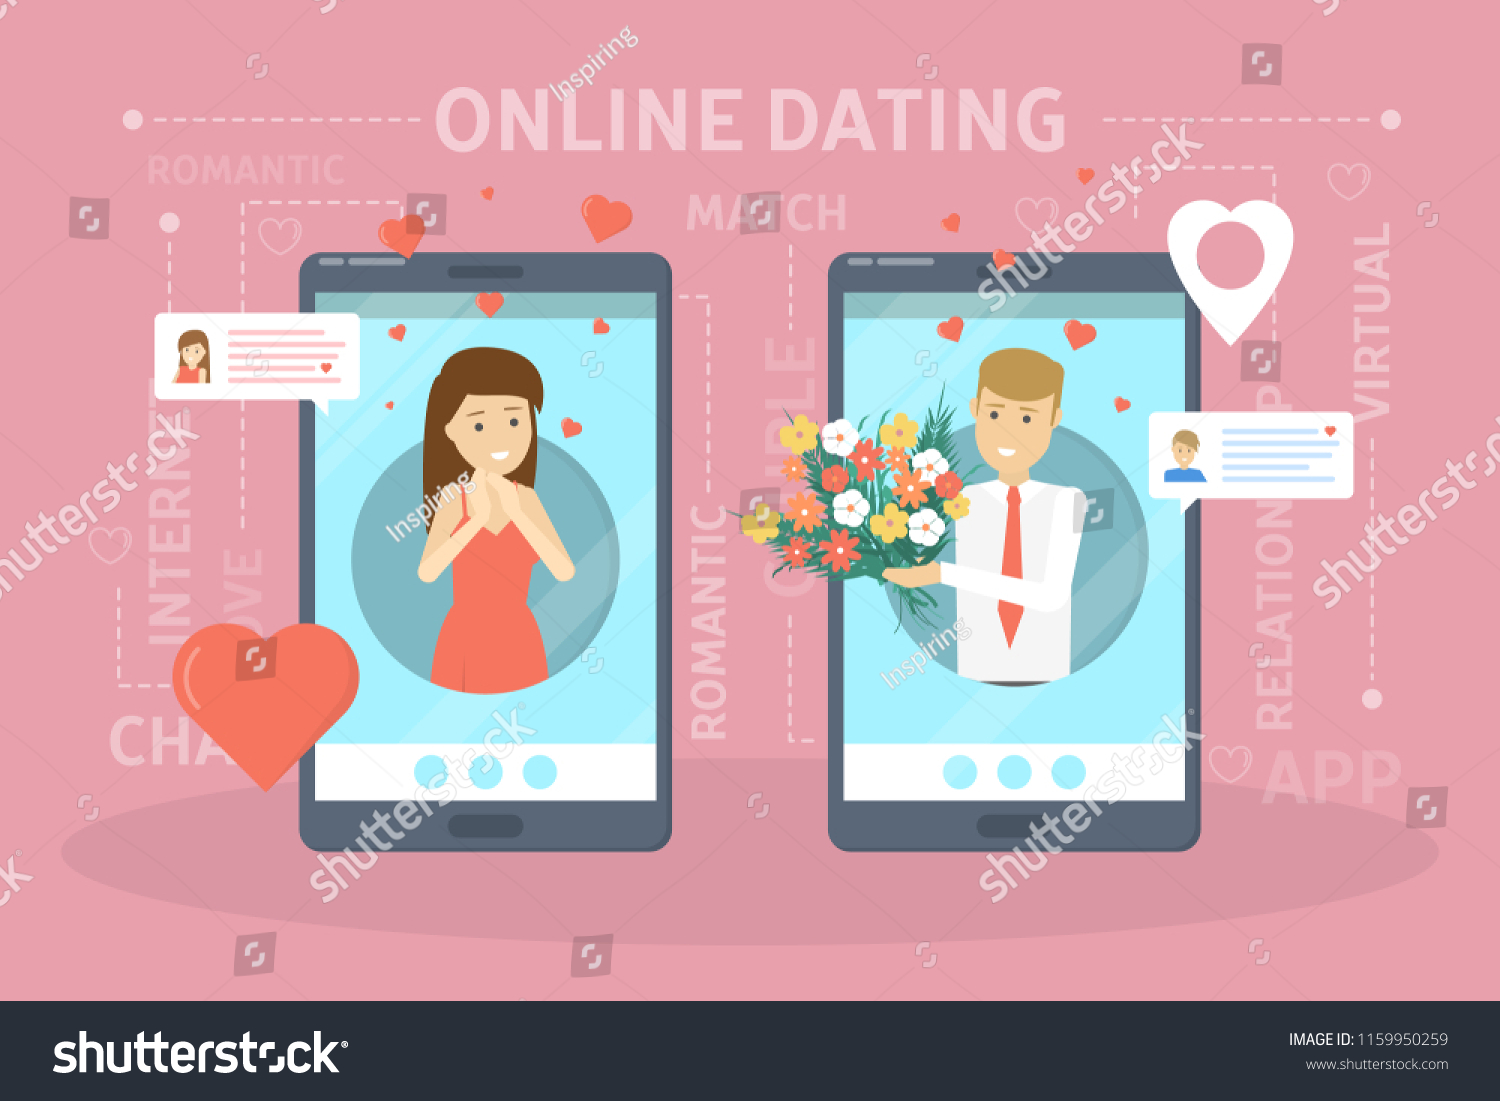 Match dating perfect online Perfect Match